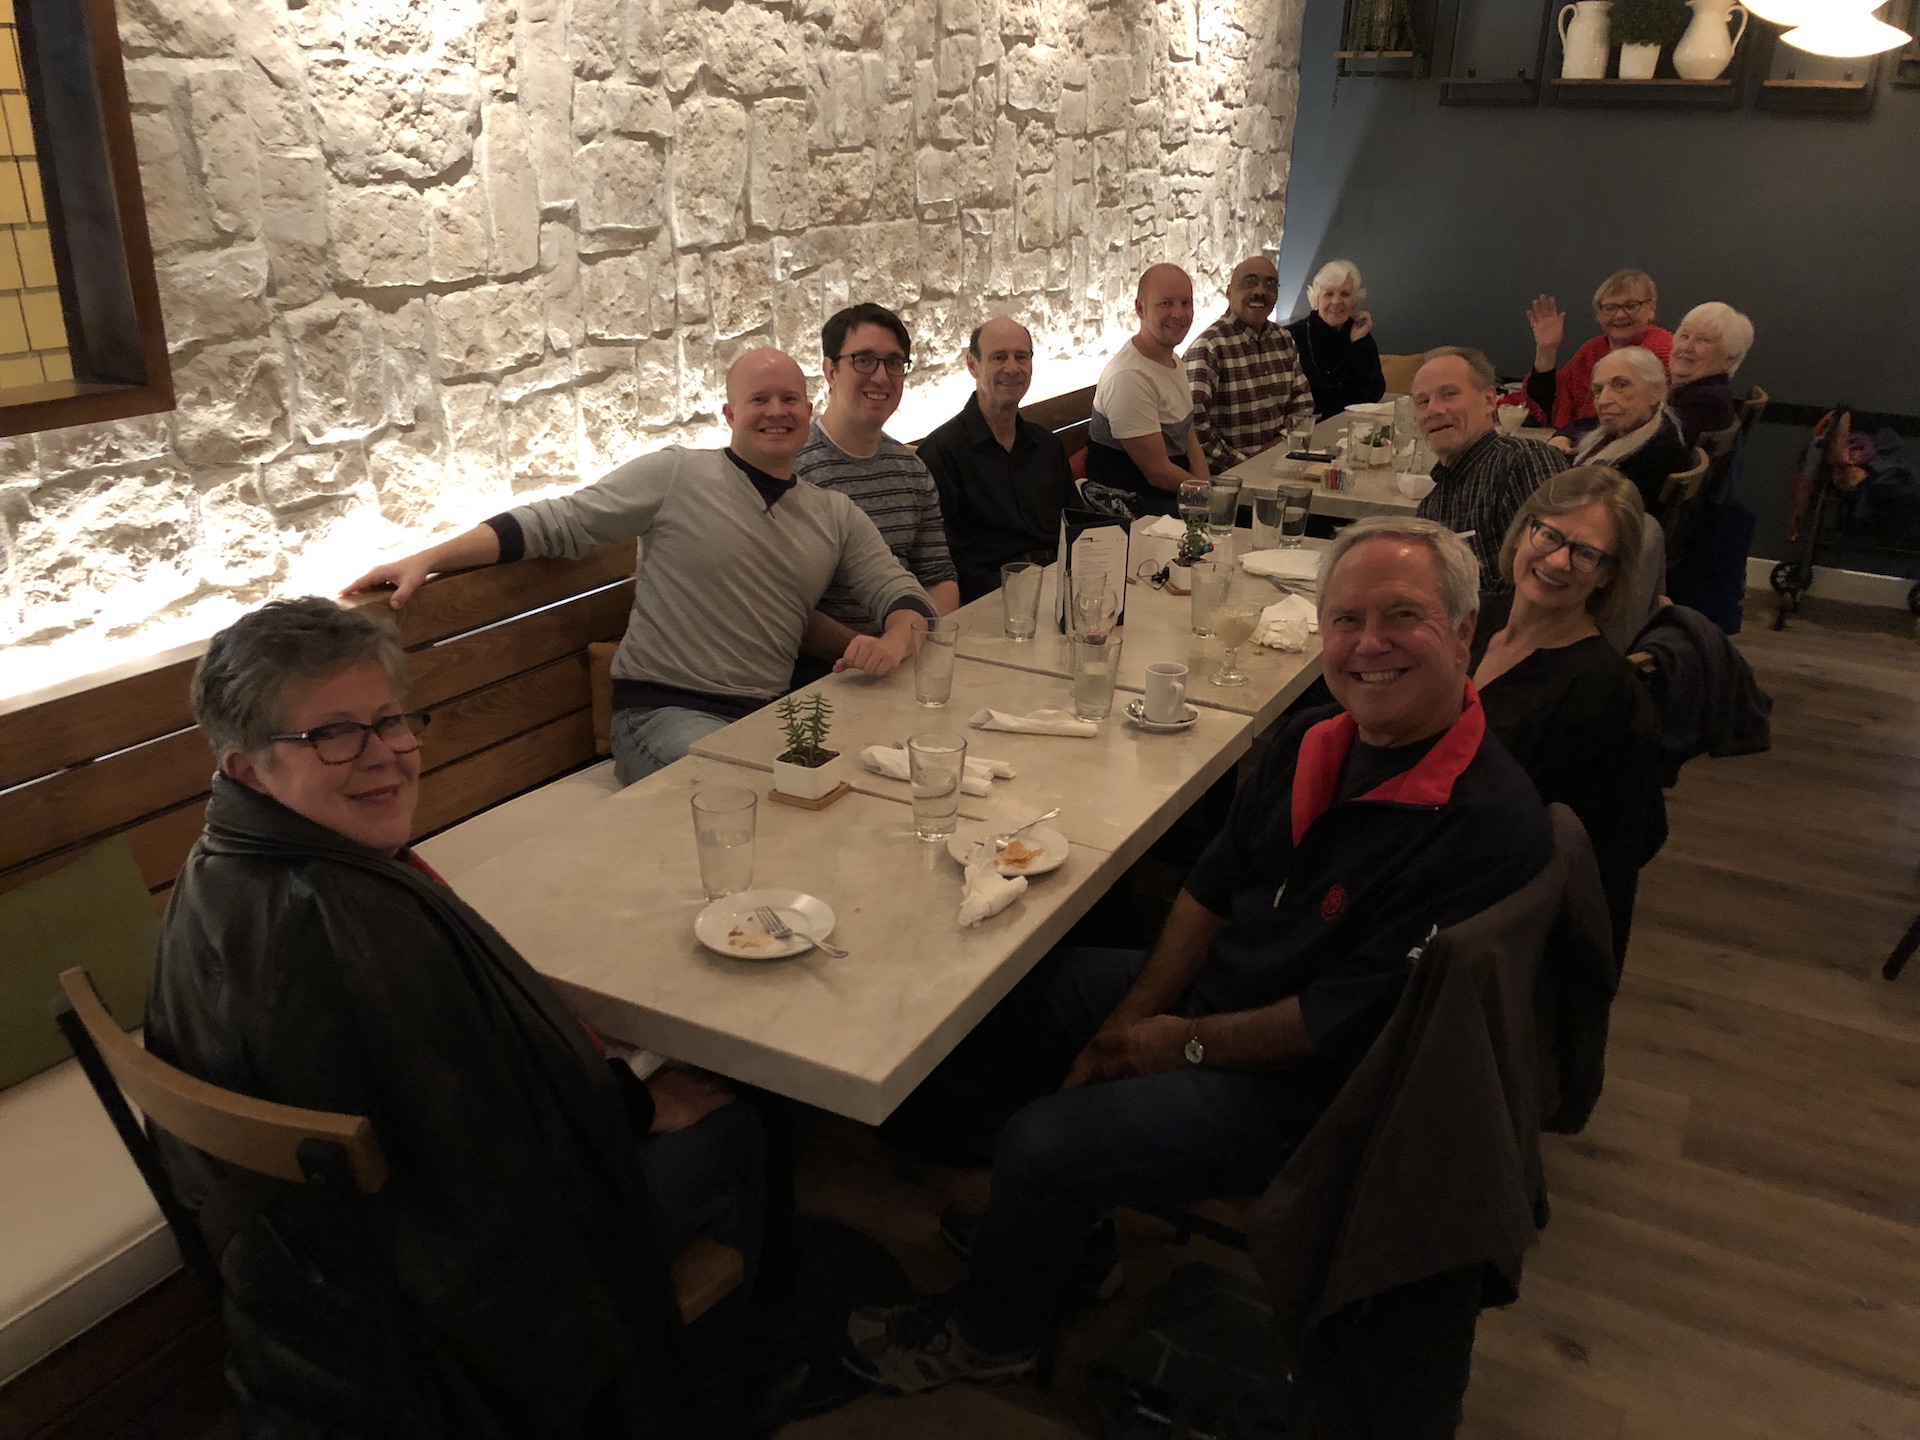 2019 FSDA Board and Families at the Holiday Party